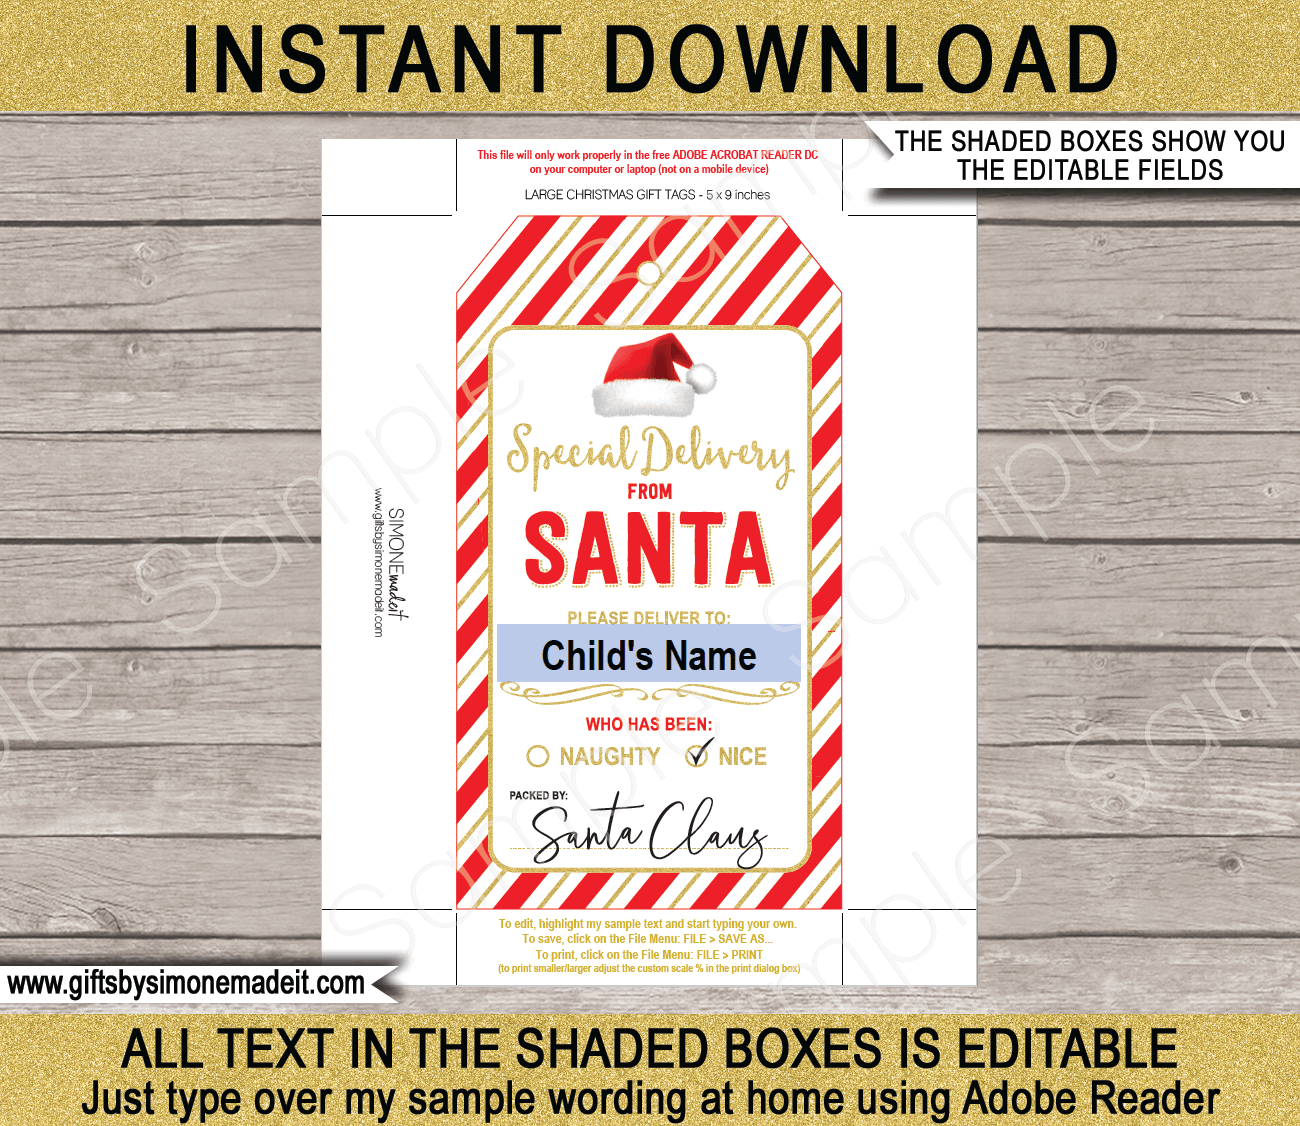 https://www.giftsbysimonemadeit.com/wp-content/uploads/2021/12/Christmas-Extra-Large-Gift-Tags-from-Santa-Printable-Template-RED-GOLD-editable-Name.png